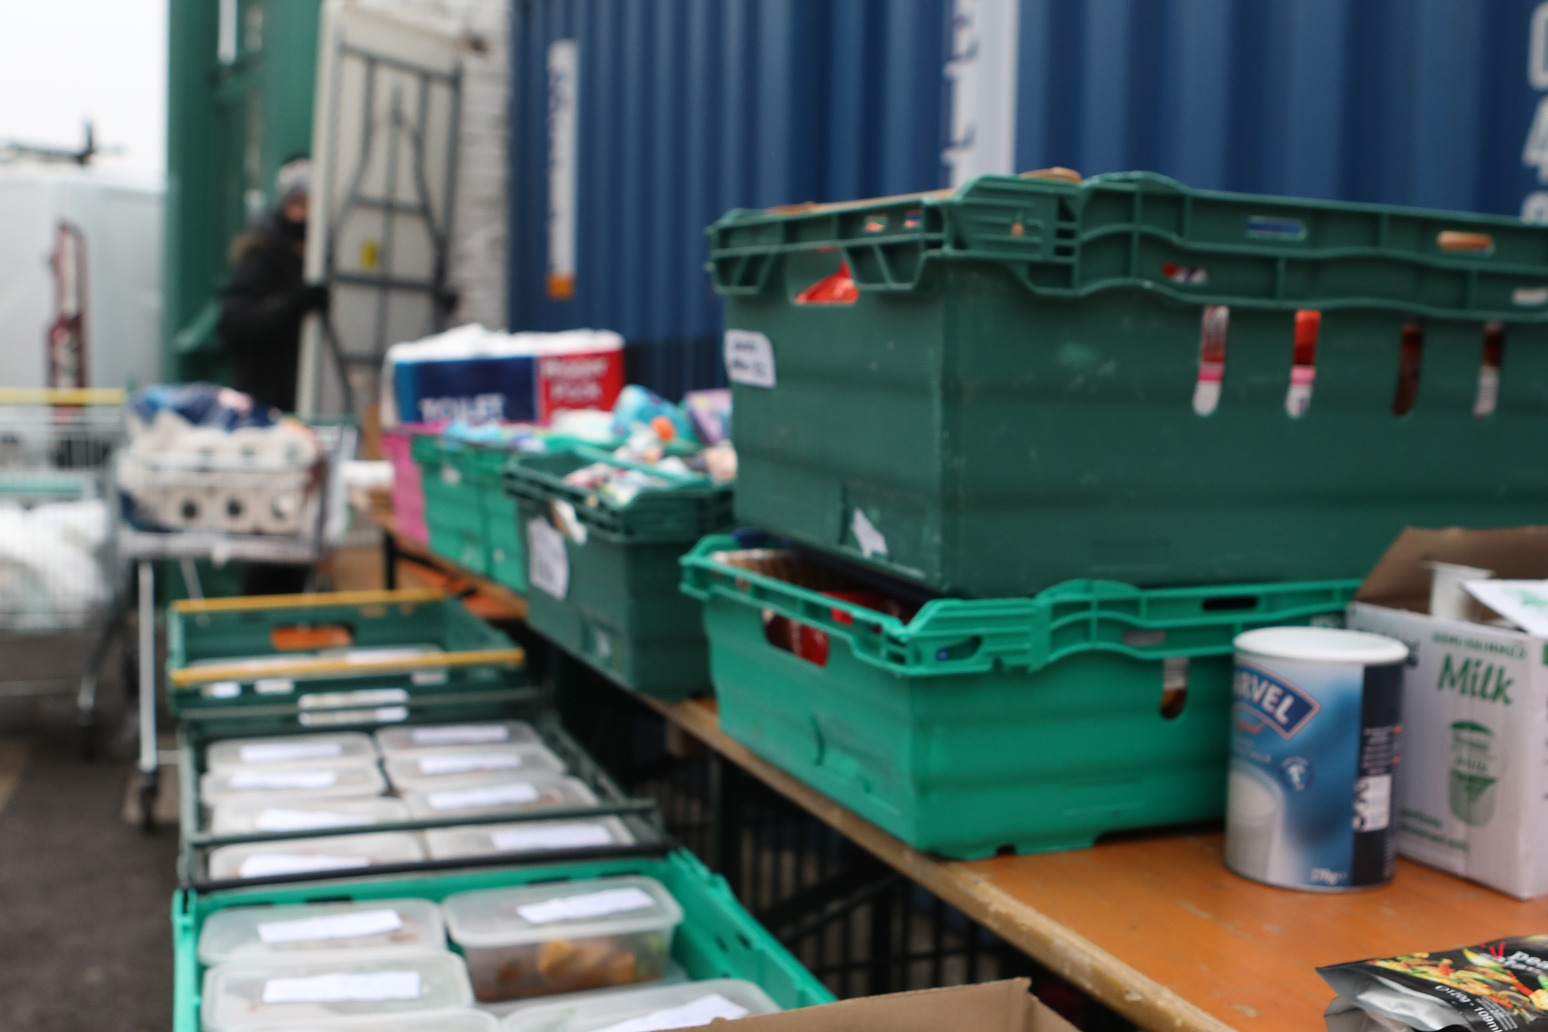 UK food banks have provided more than 2.1 million food parcels in past year 